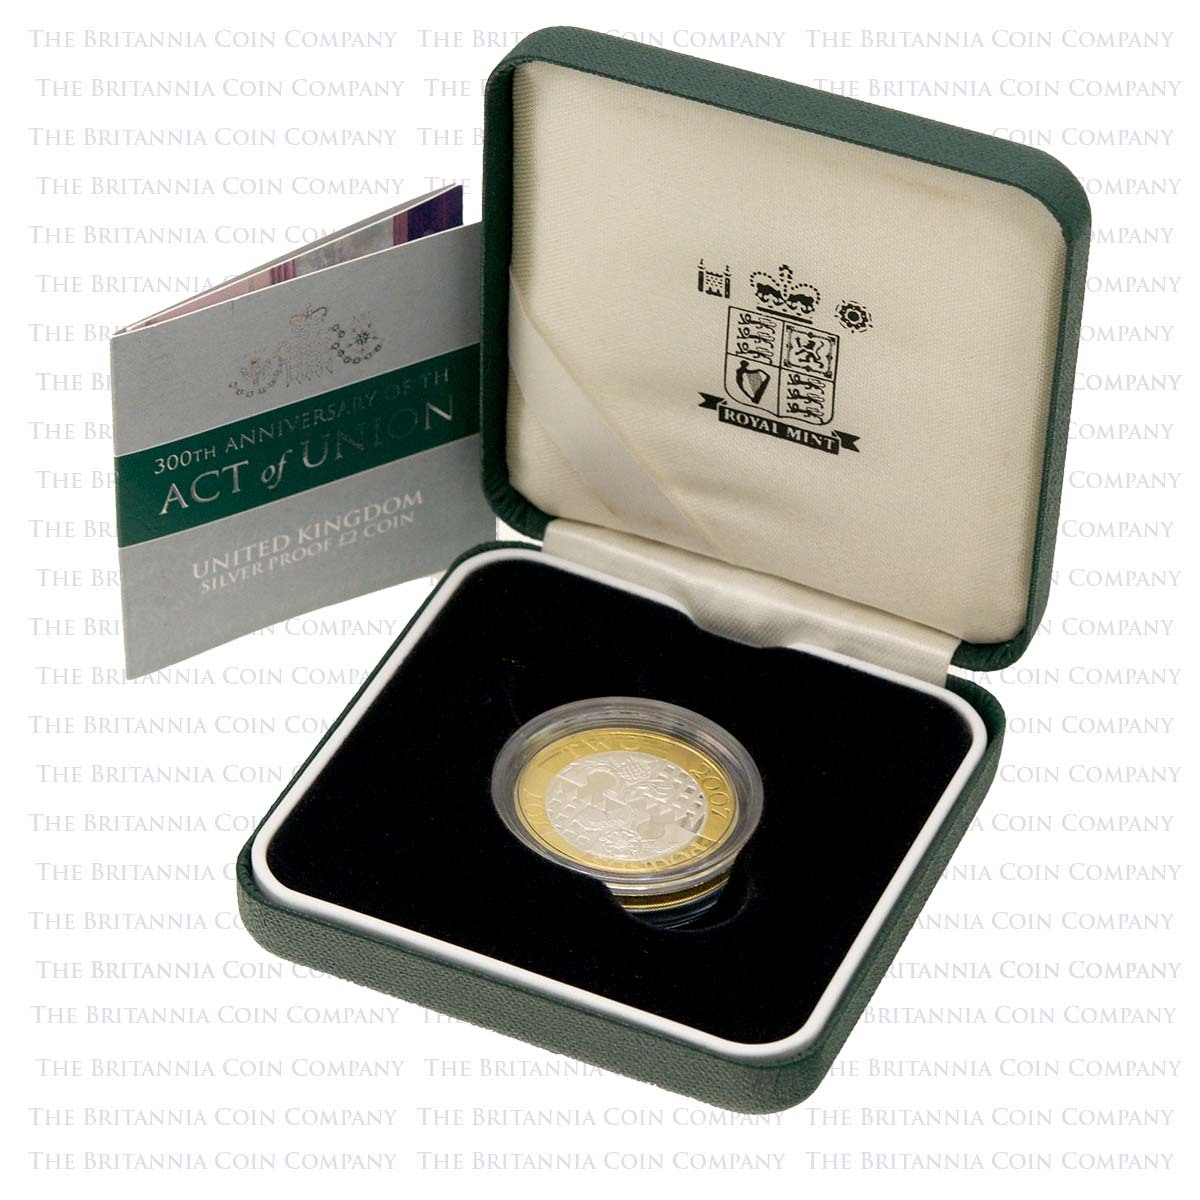 2007 Act of Union 300th Anniversary £2 Silver Proof Boxed